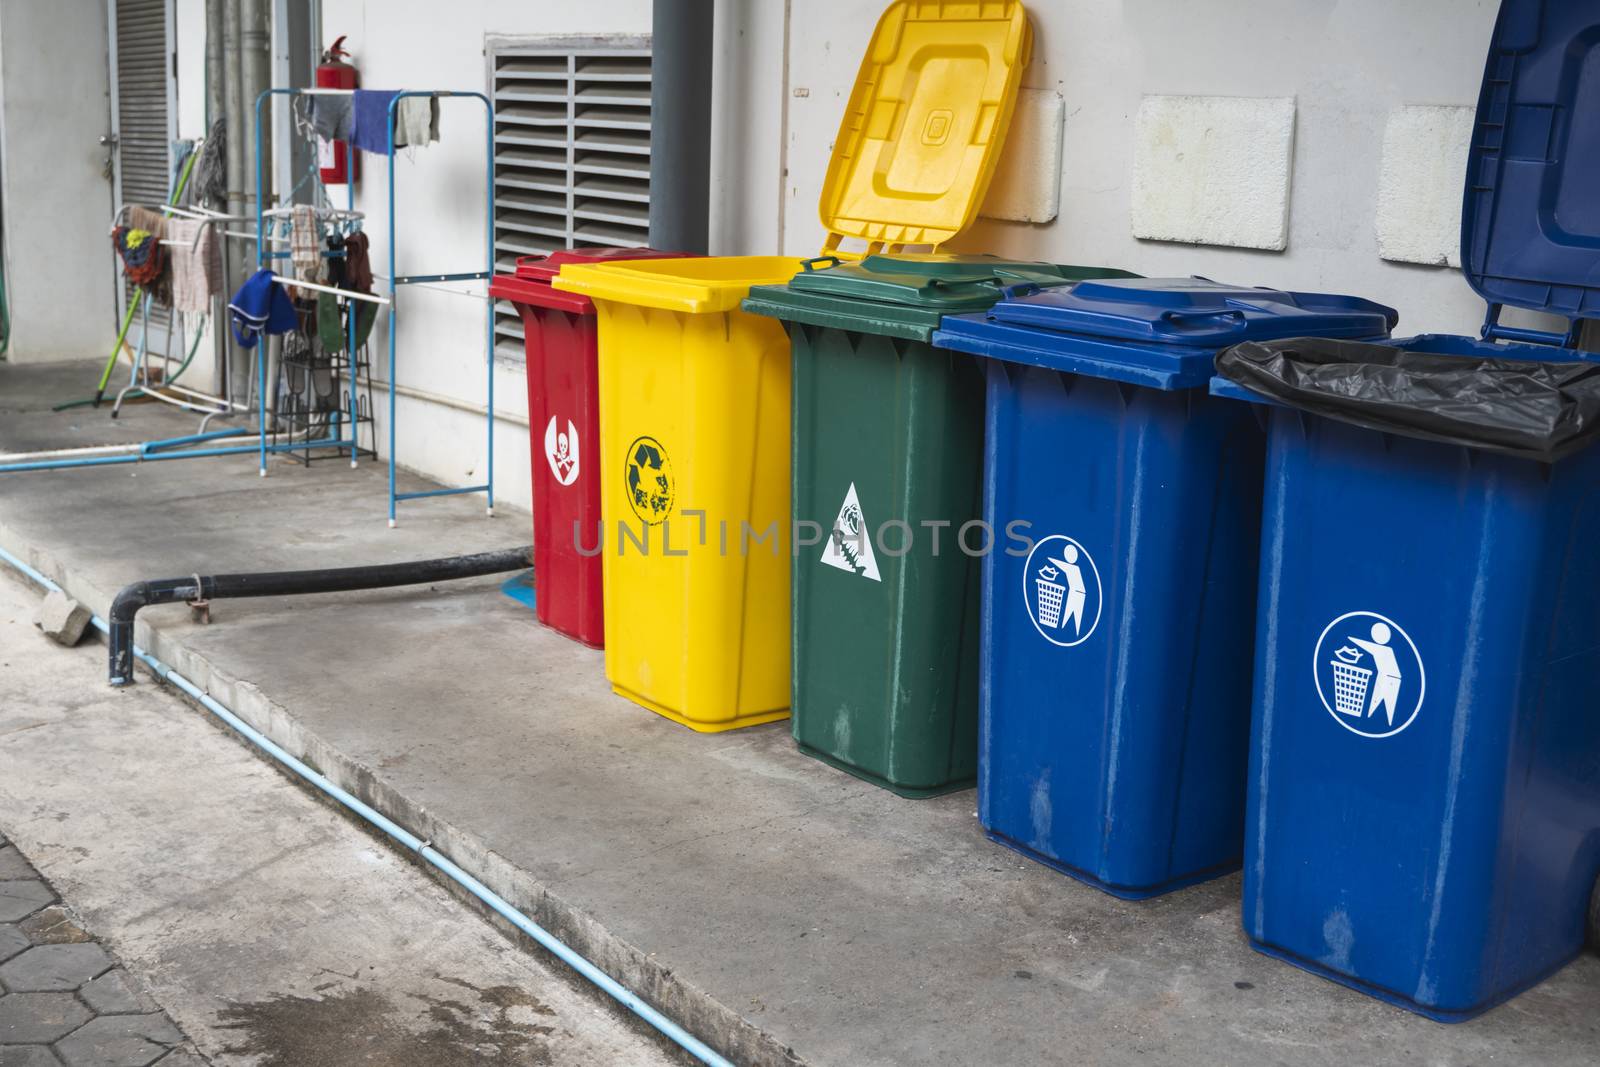 Garbage Trash Bins for collecting a recycle materials. Garbage trash bins for waste segregation. Separate waste collection food waste, plastic, paper and danger waste. Recycling. Environment